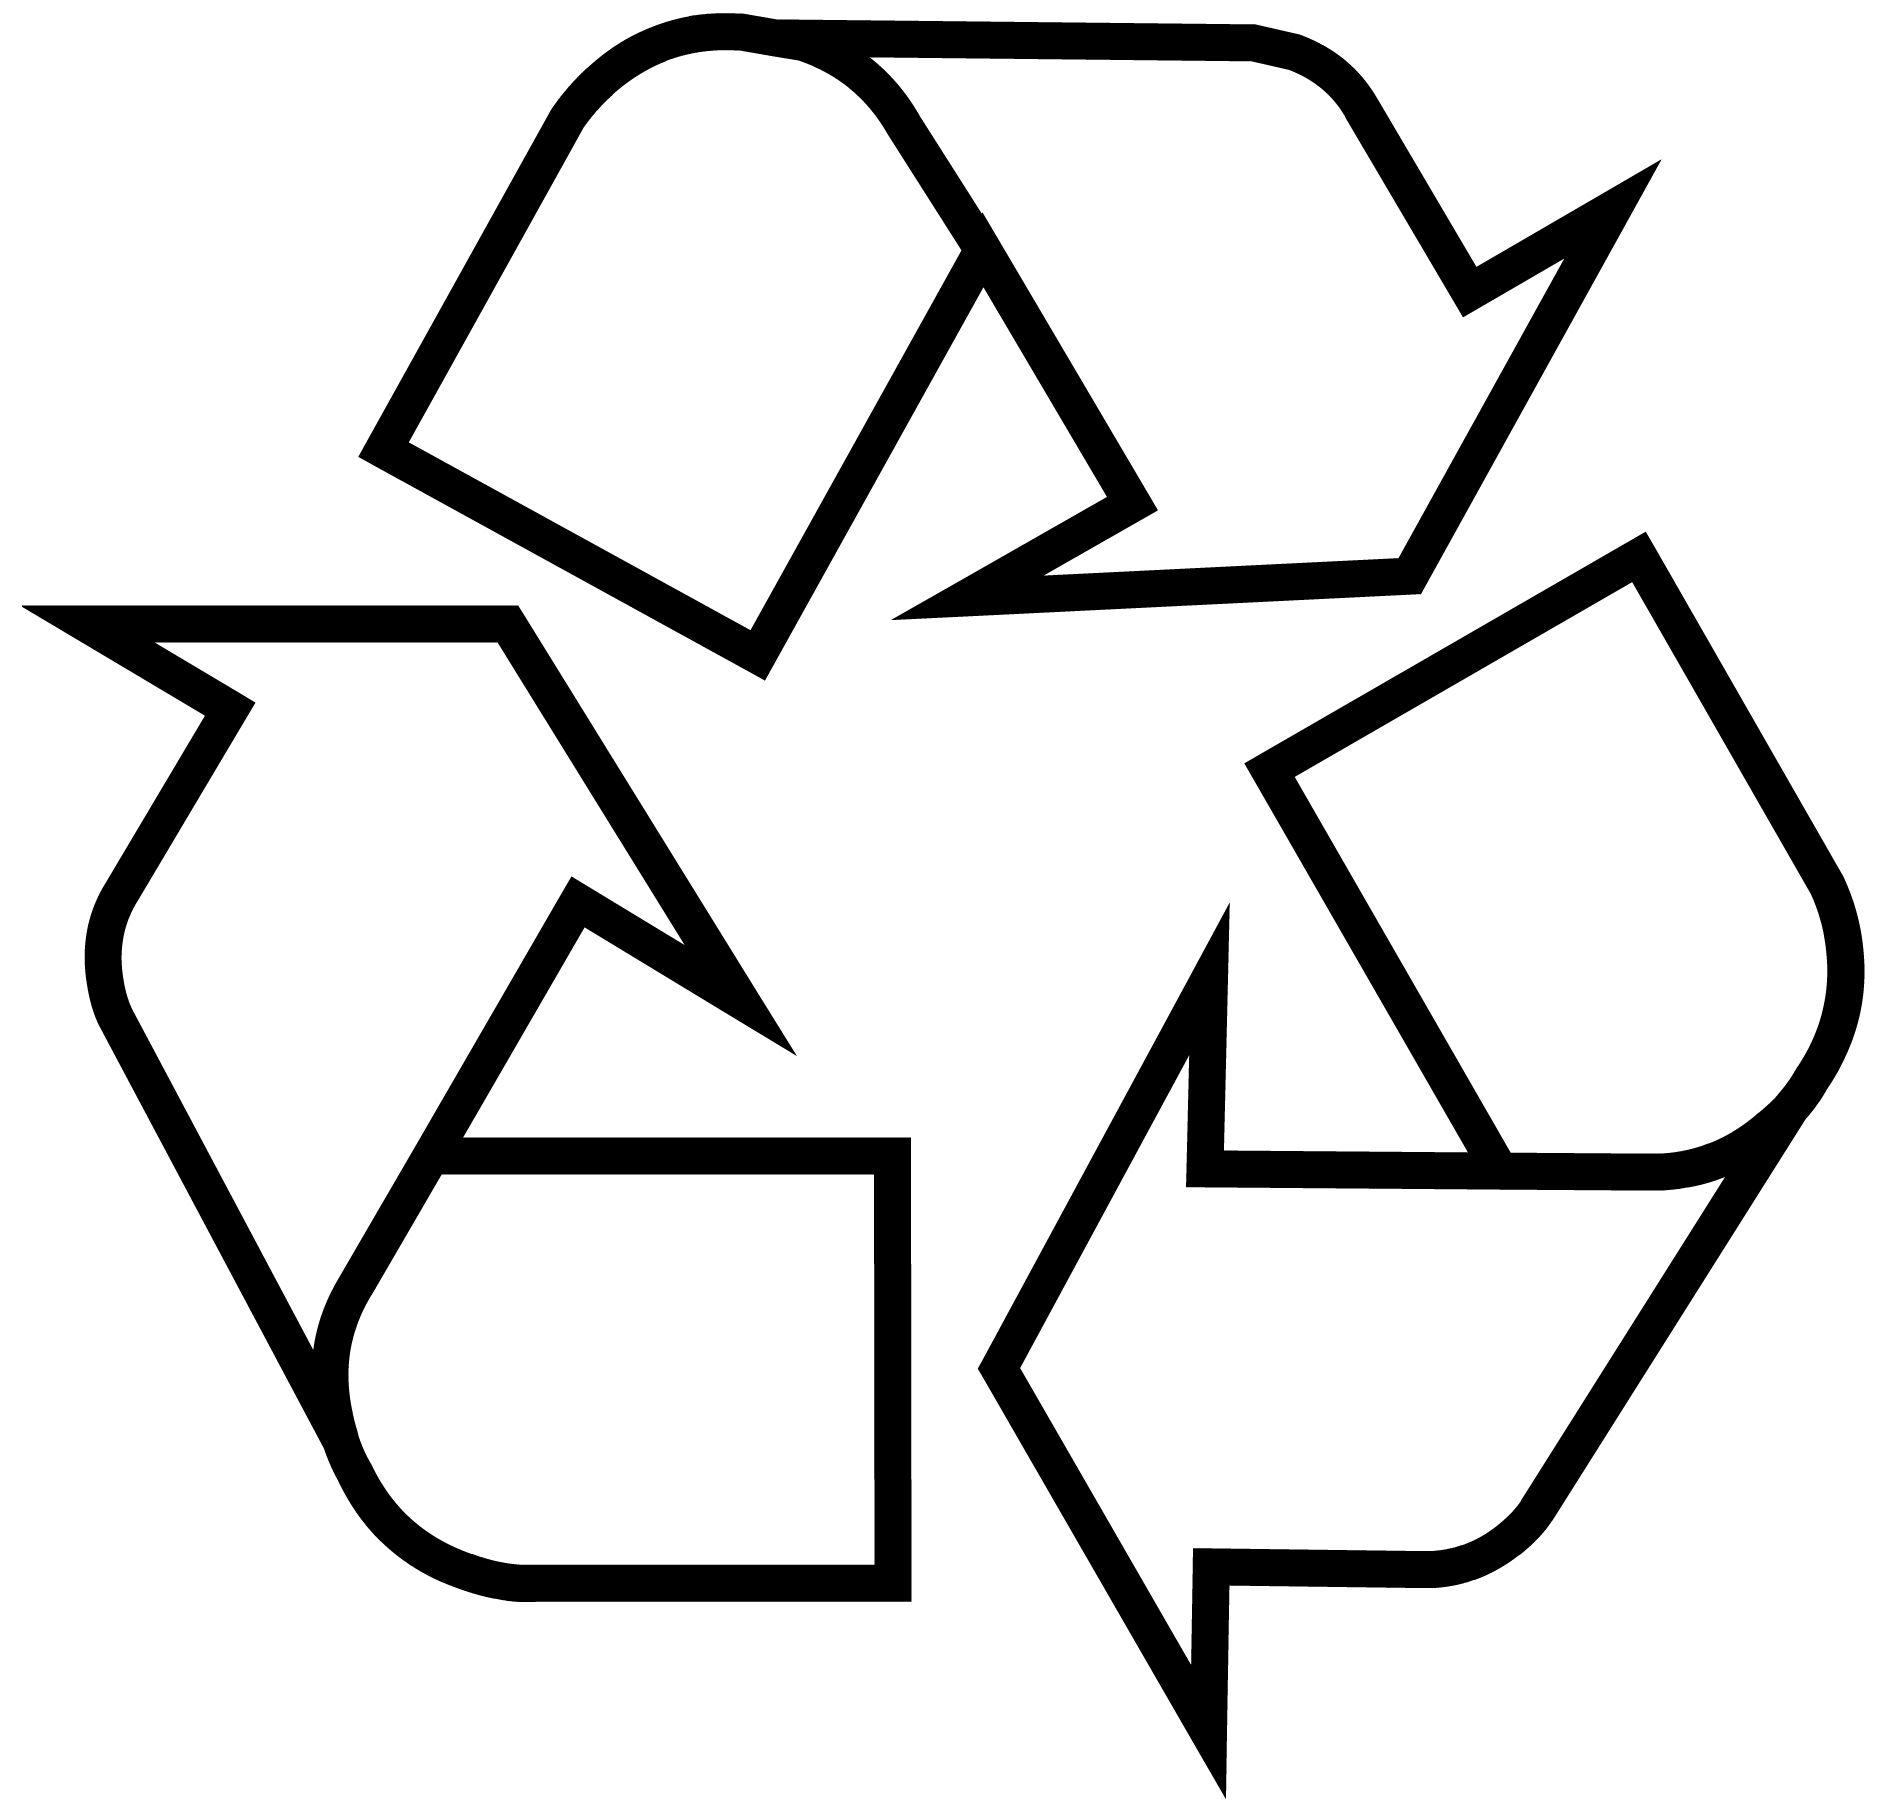 Printable Black and White Logo - Recycling Symbol - Download the Original Recycle Logo